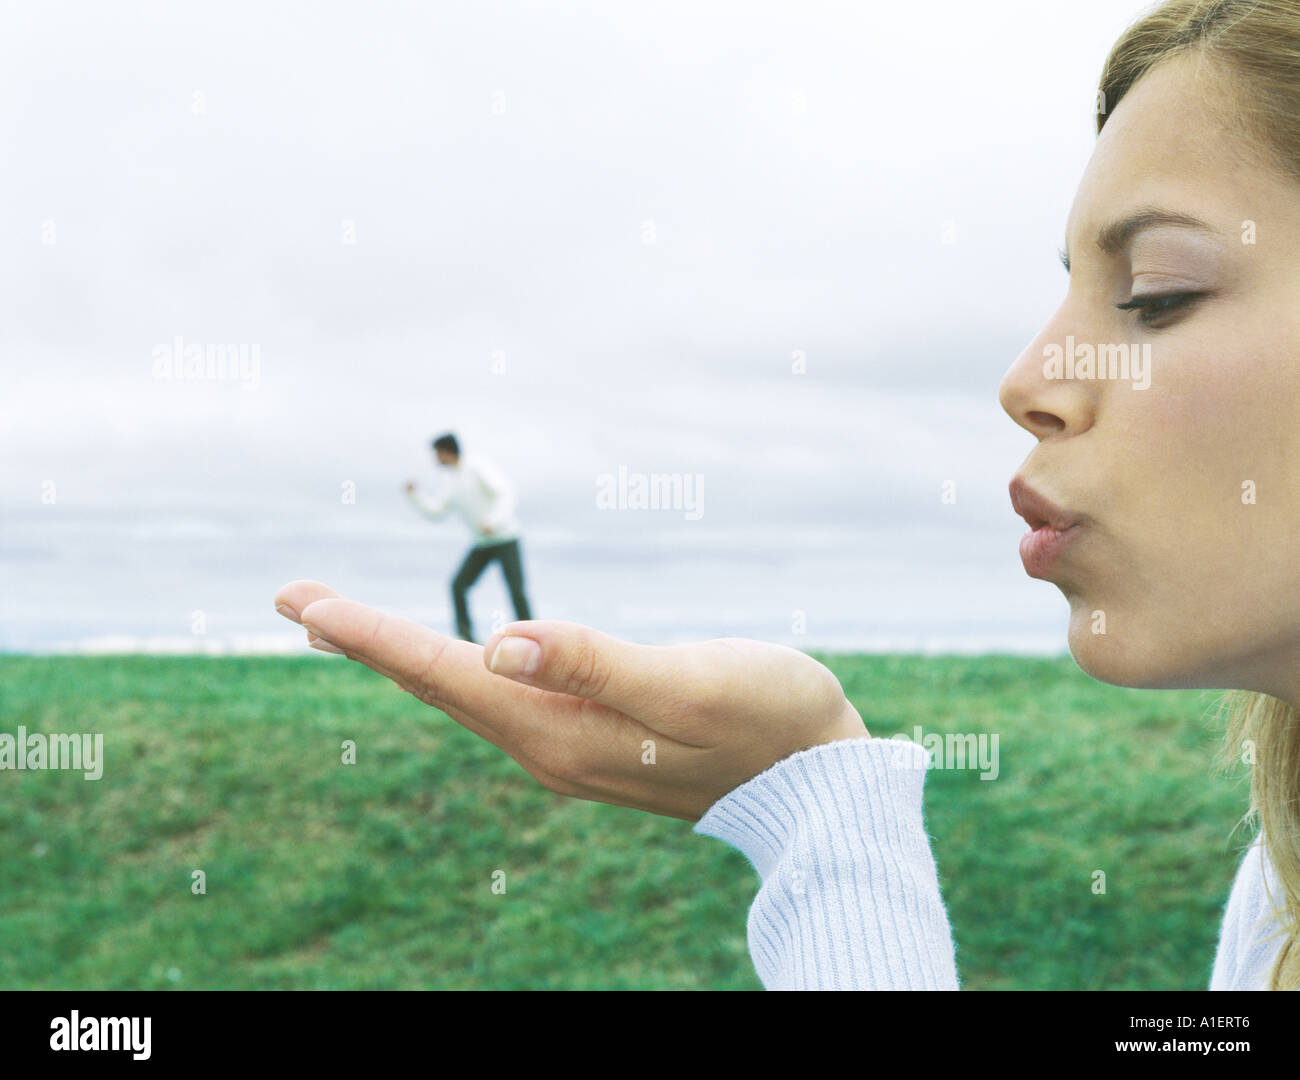 Man standing on woman's hand, optical illusion Stock Photo